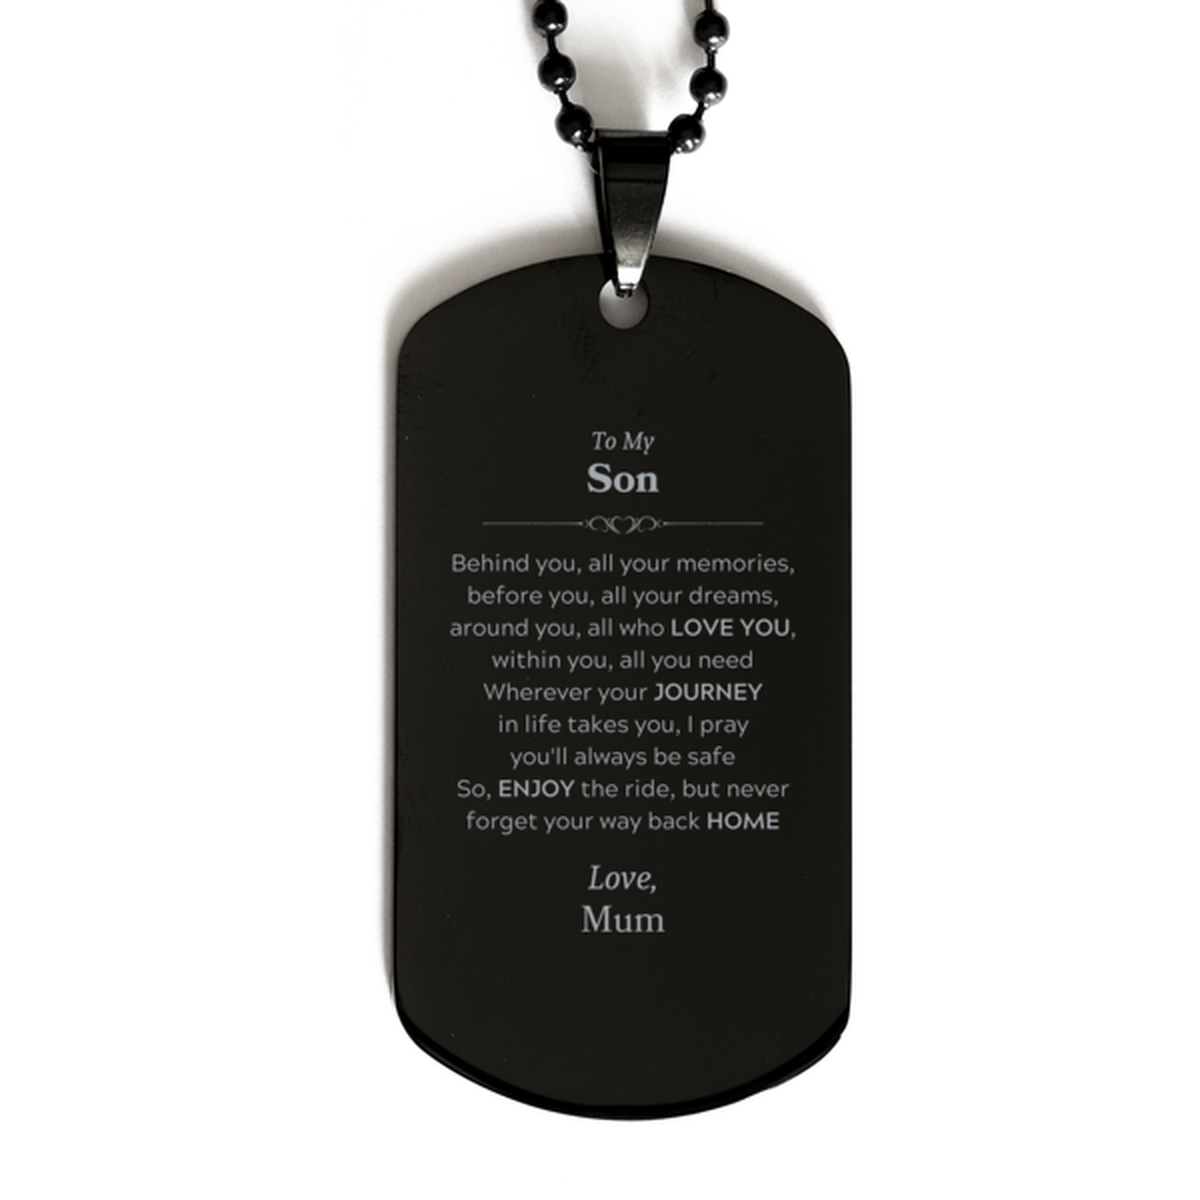 To My Son Graduation Gifts from Mum, Son Black Dog Tag Christmas Birthday Gifts for Son Behind you, all your memories, before you, all your dreams. Love, Mum